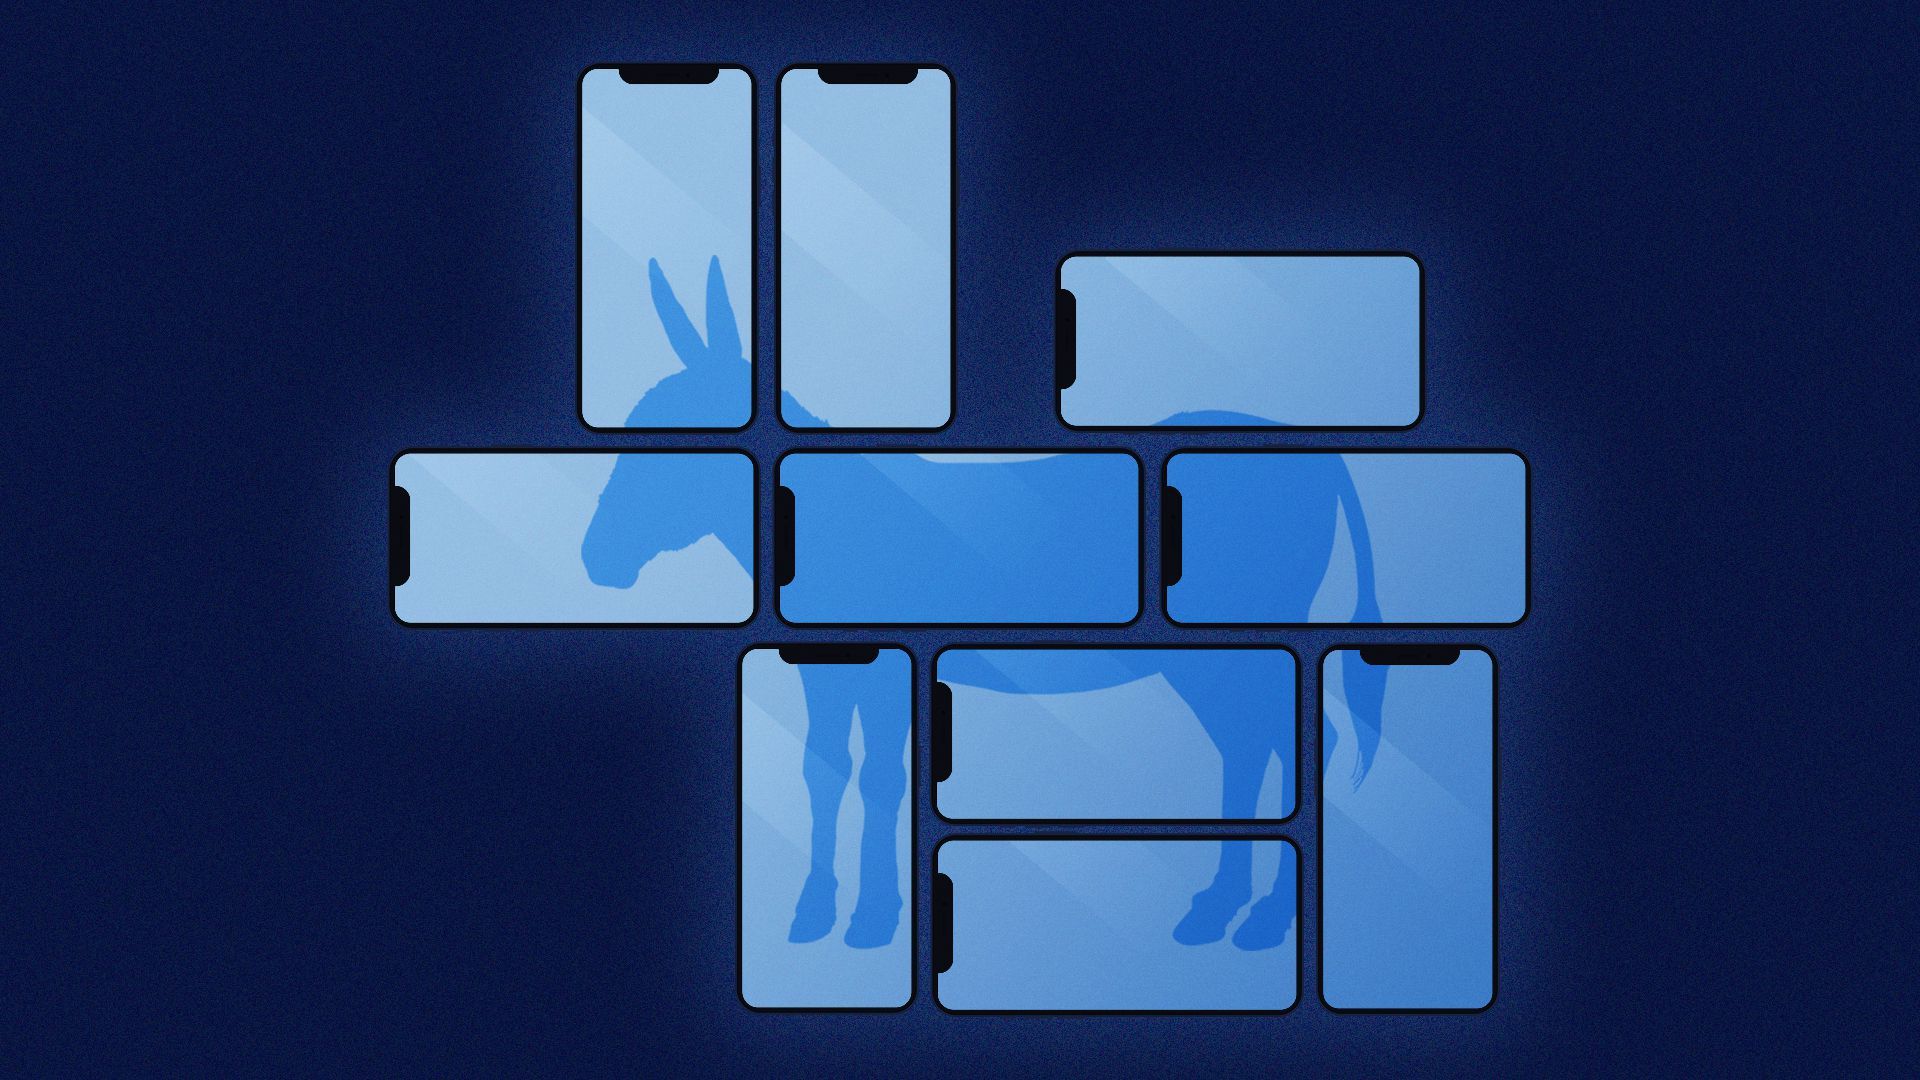 Illustration of smart phones arranged so that their screens form a giant donkey. 